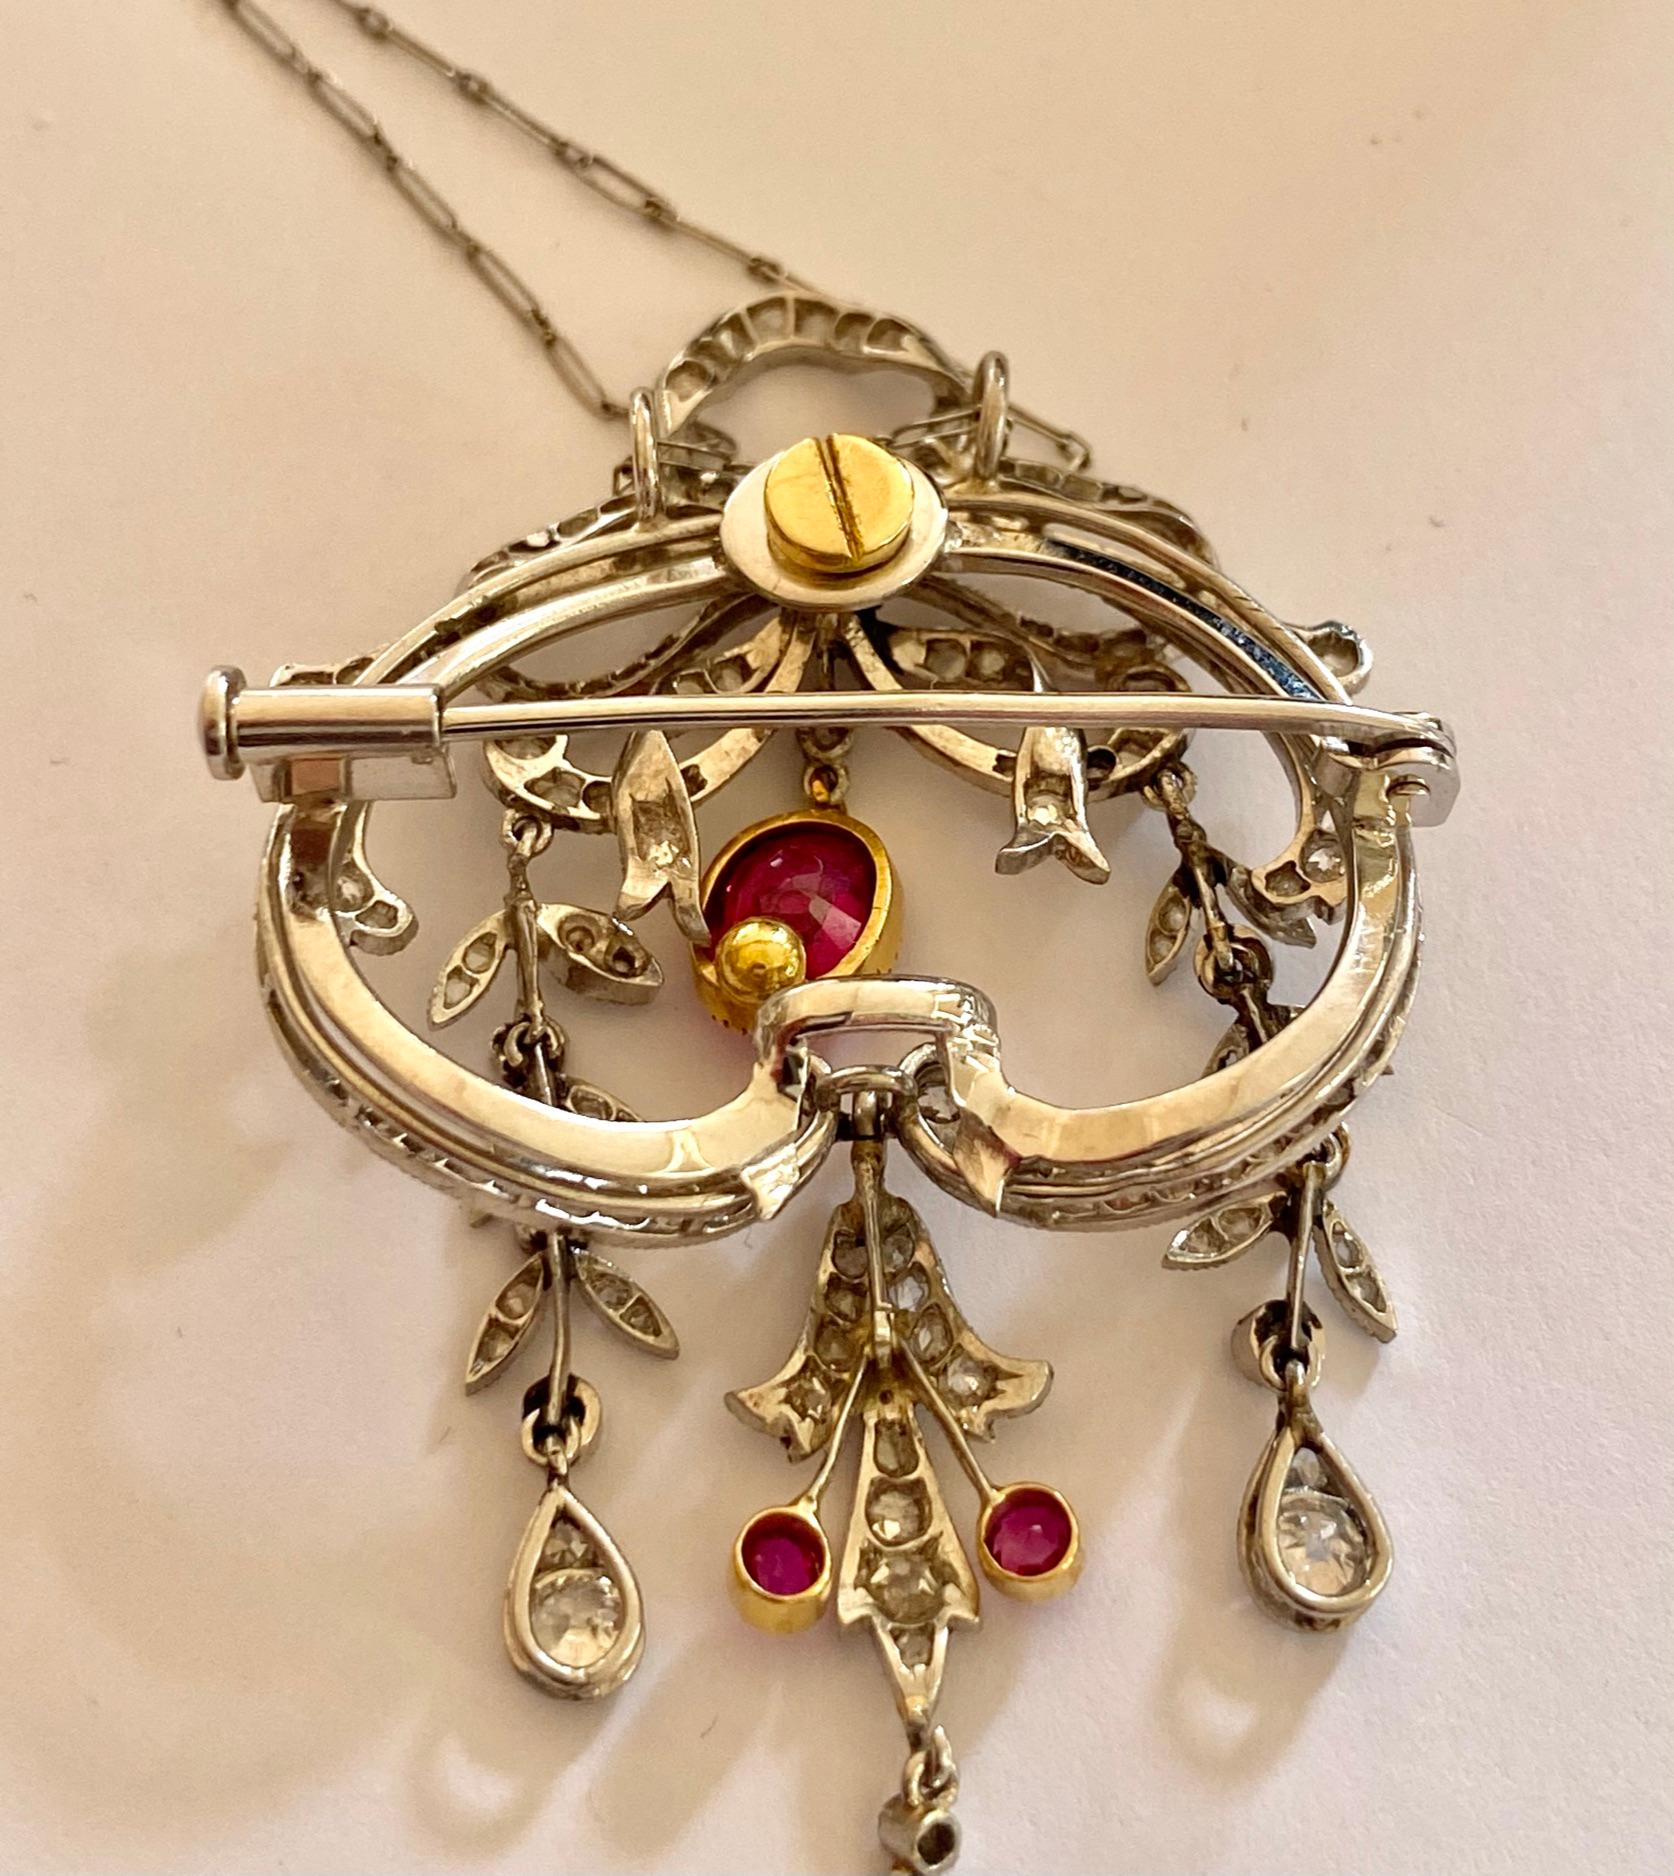 Edwardian Pendant with Chain / Brooch Platinum, Gold, Diamonds and Birma Ruby For Sale 1